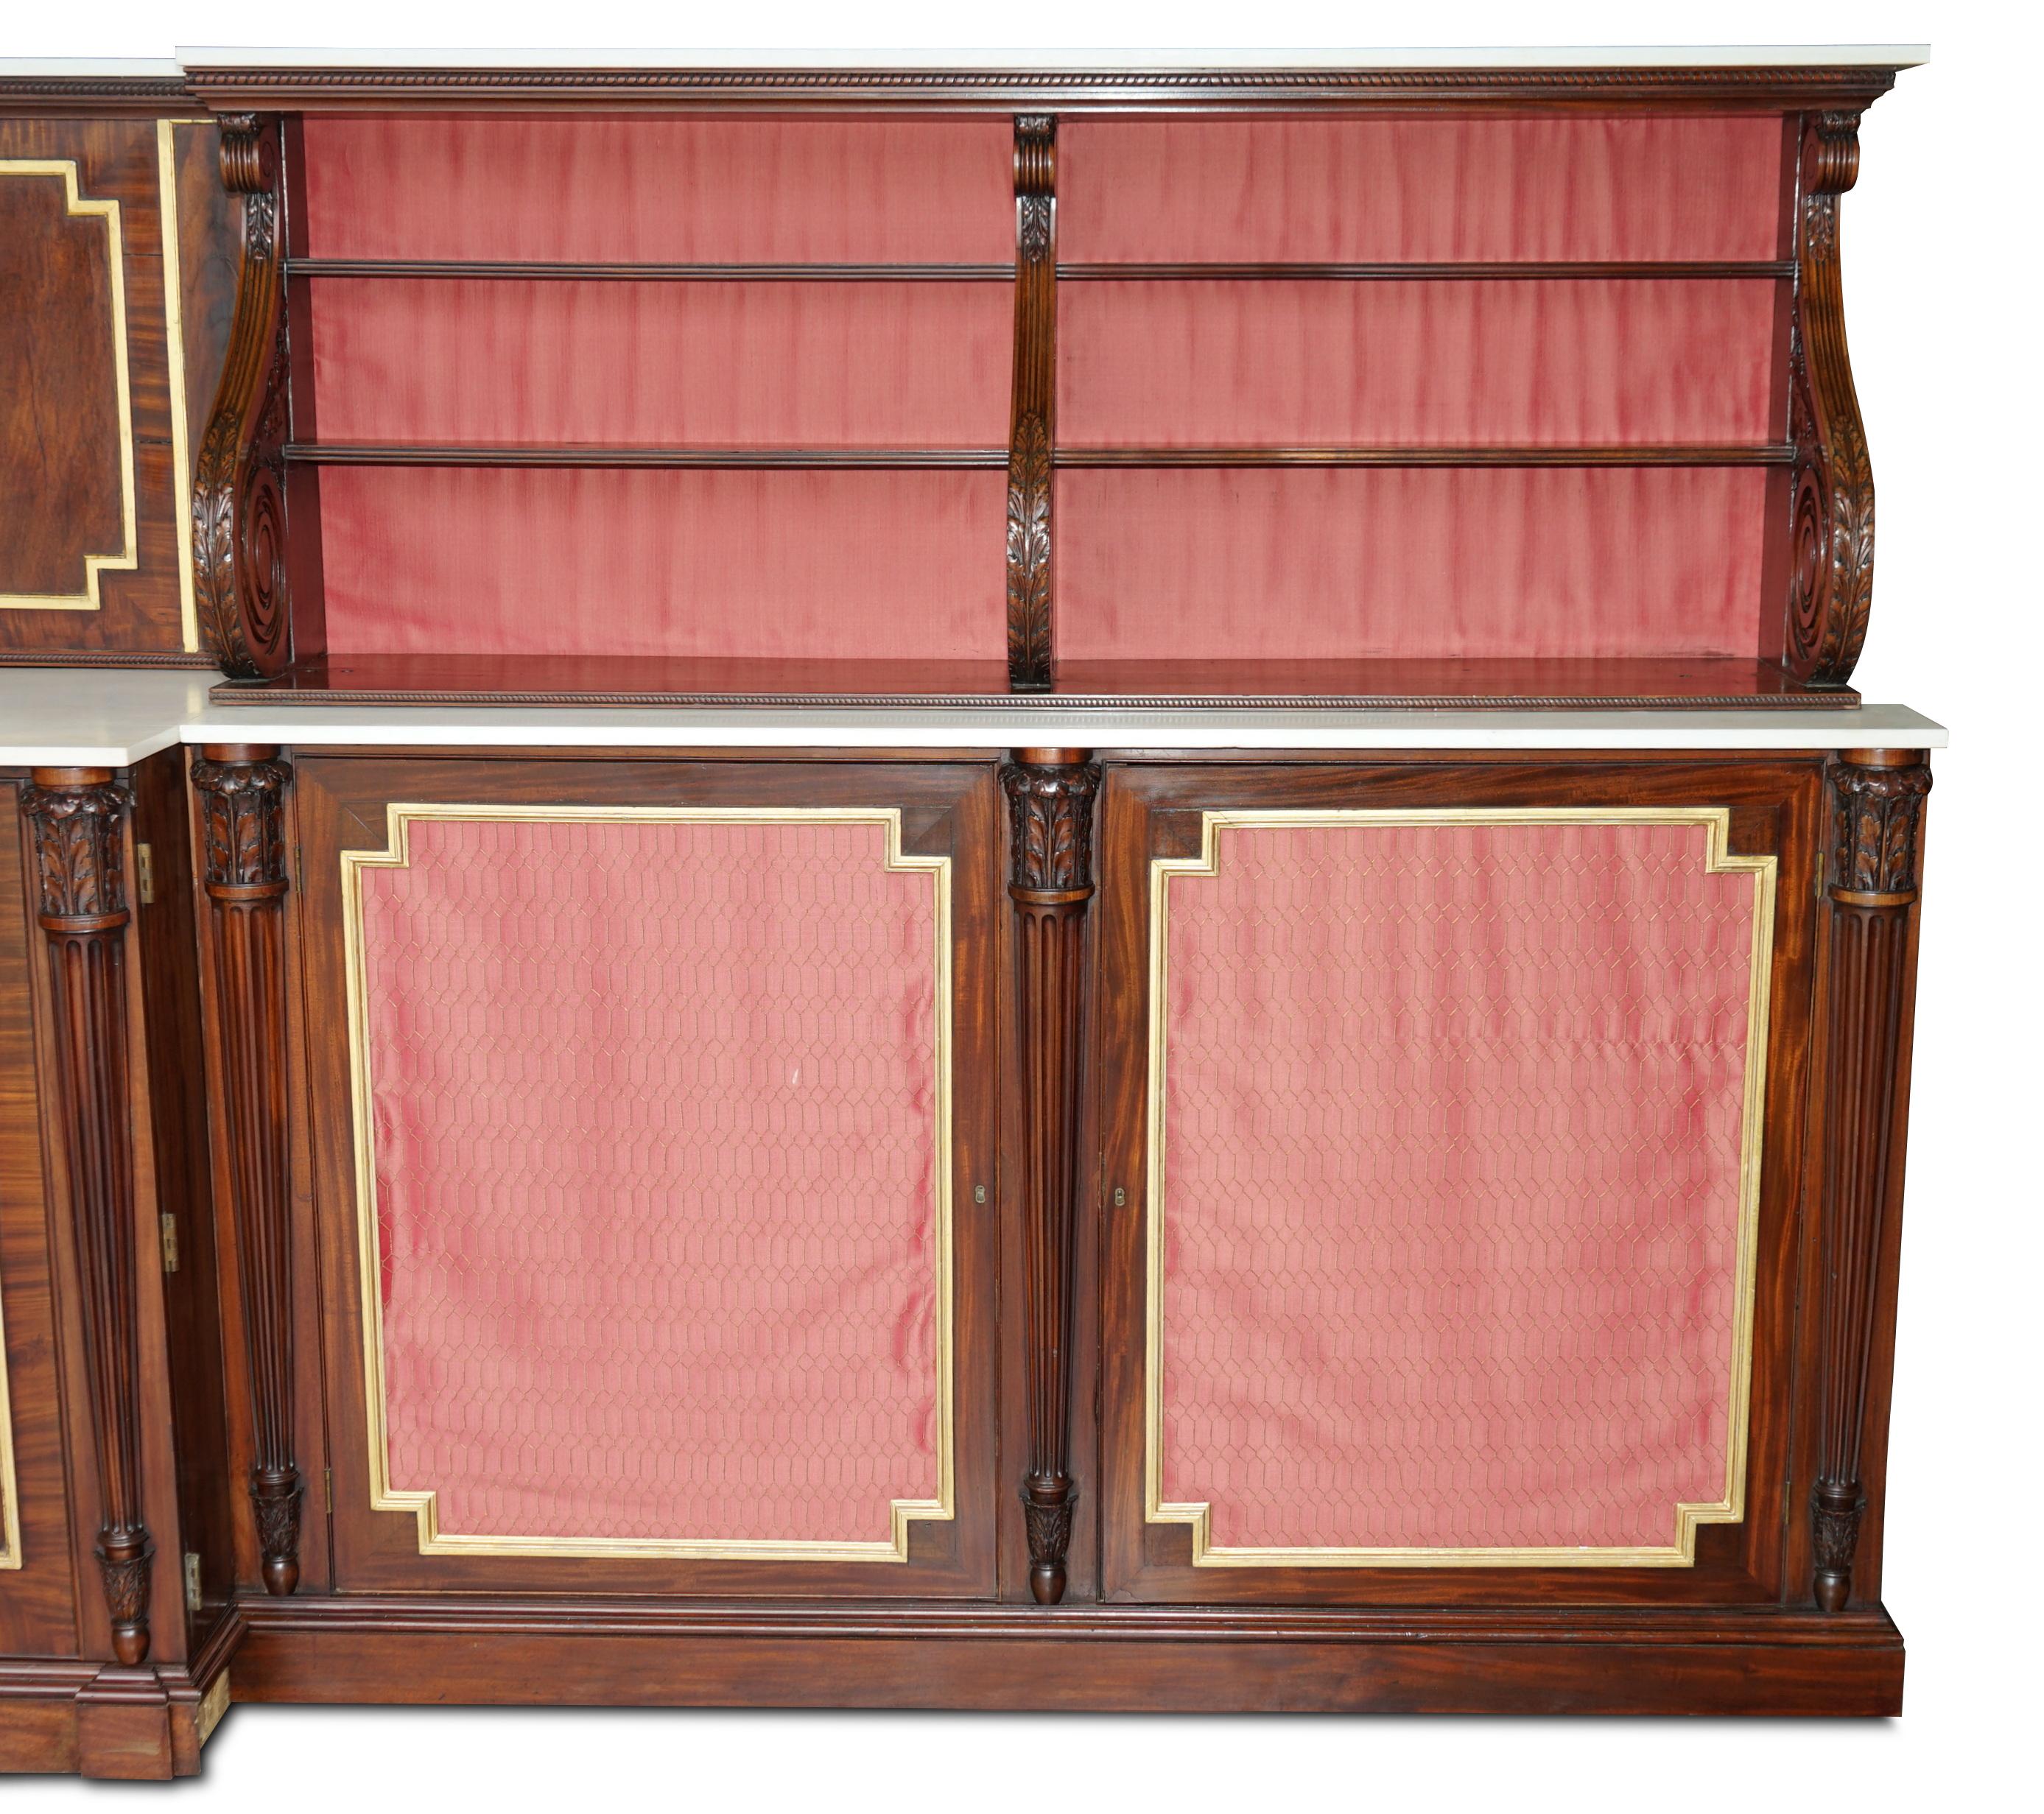 Hand-Crafted Important Monumental Antique Regency Hardwood Italian Marble Sideboard For Sale